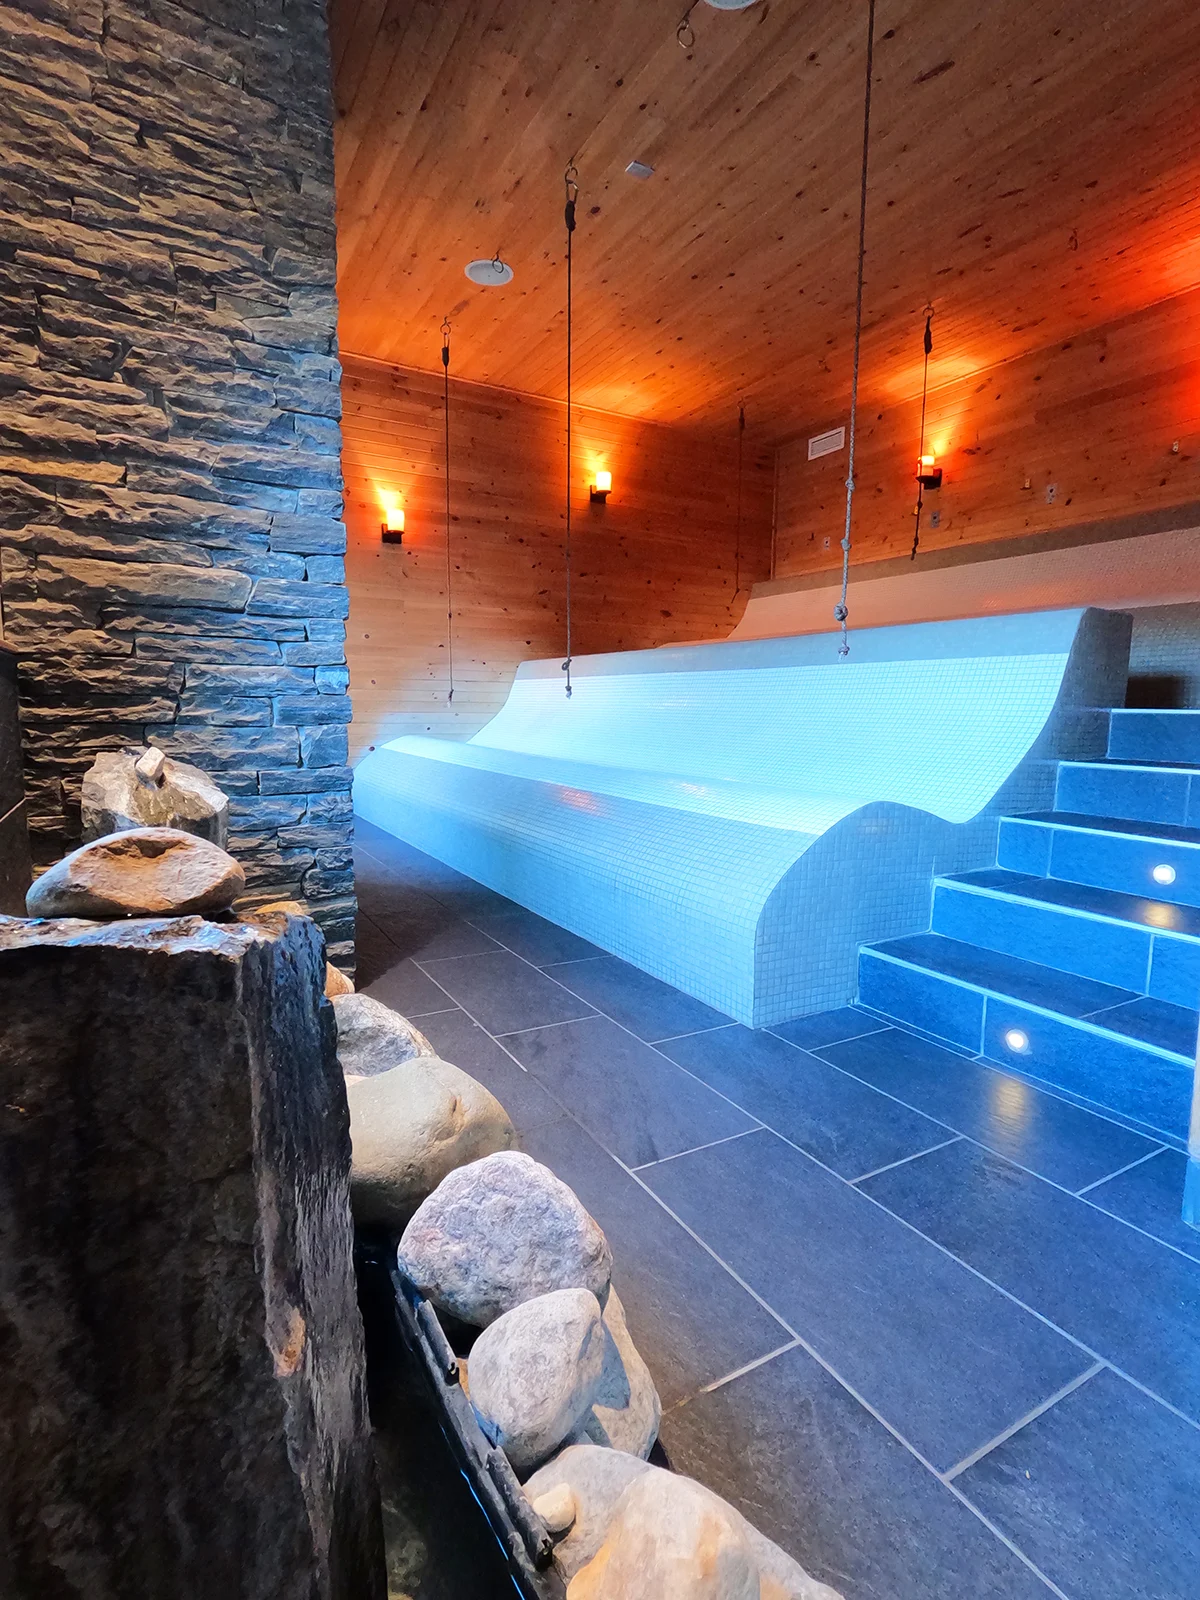 things to do in winnipeg view of sauna with rock formation curved bench in wooden and tile room